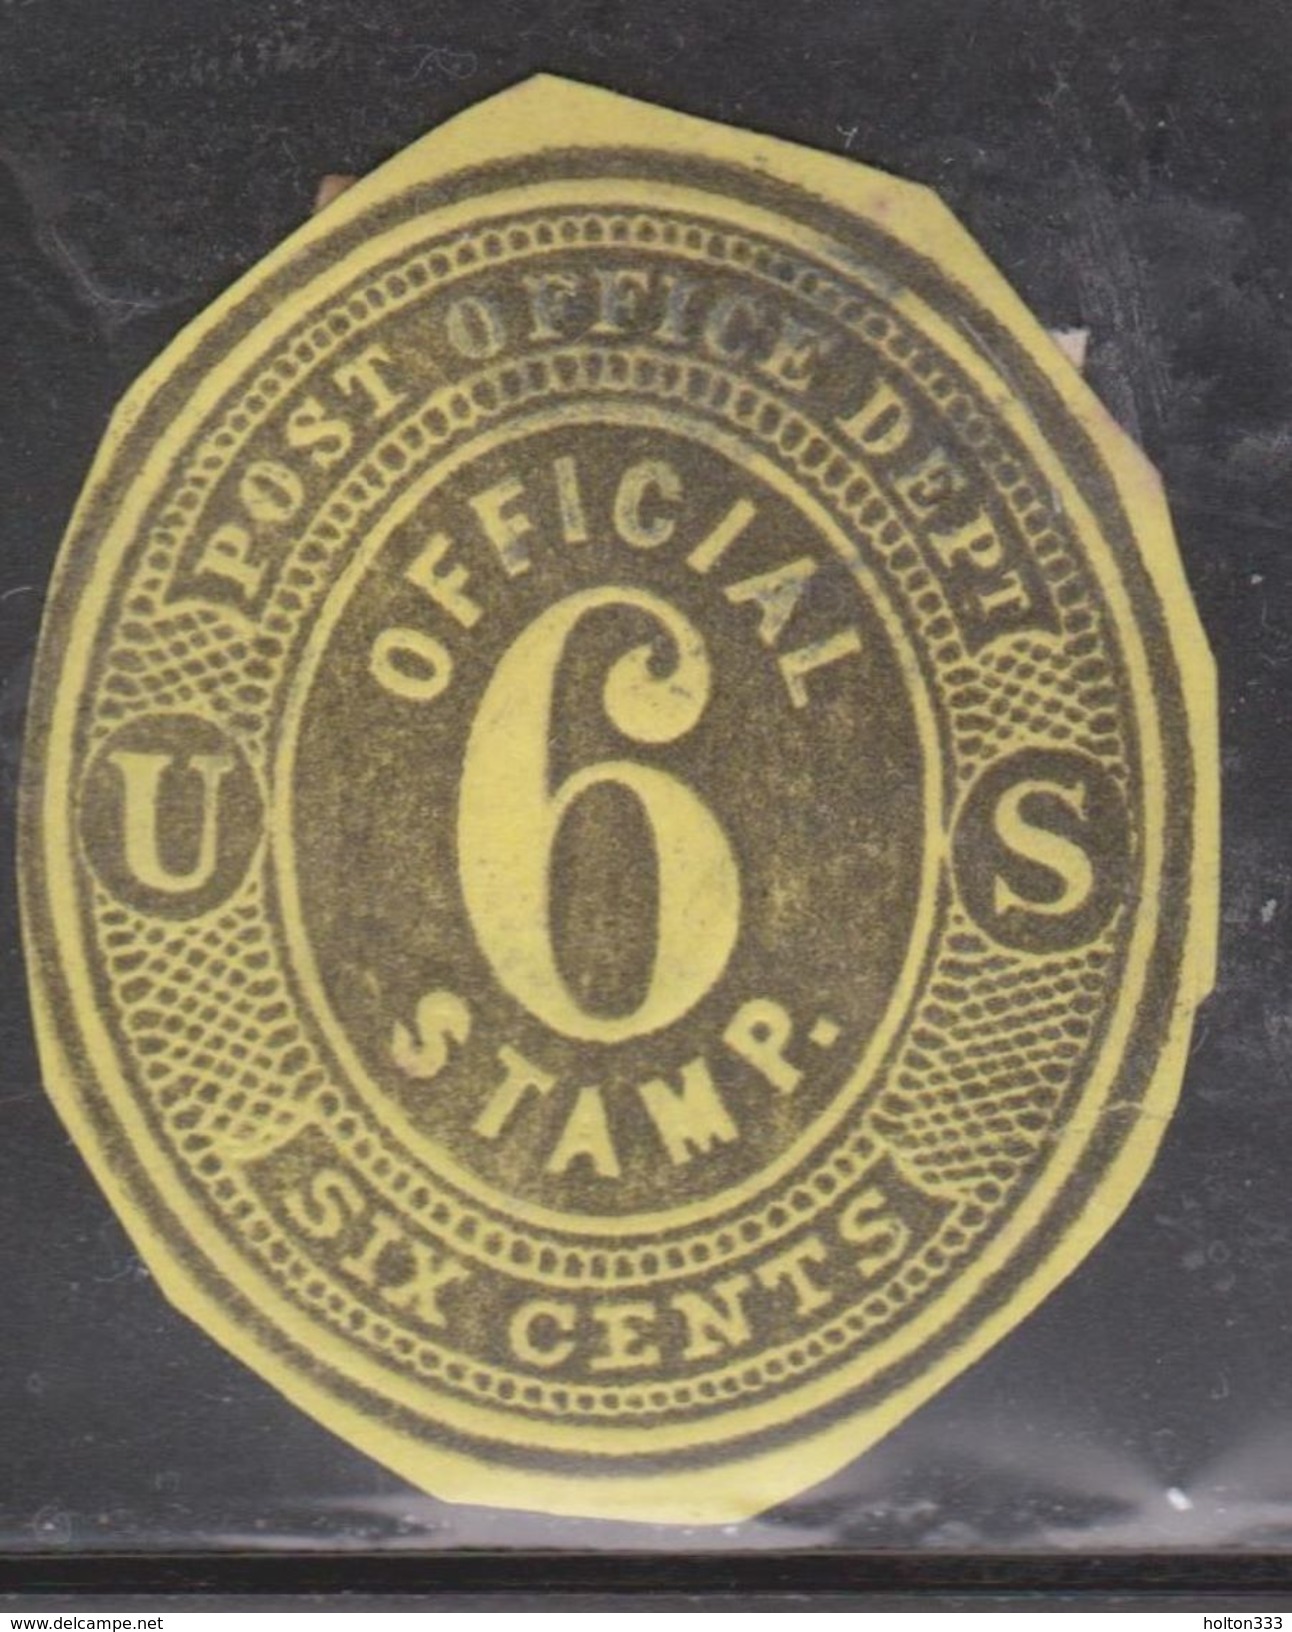 UNITED STATES Scott # UO12 Used - Post Office Department Cut Square - Service